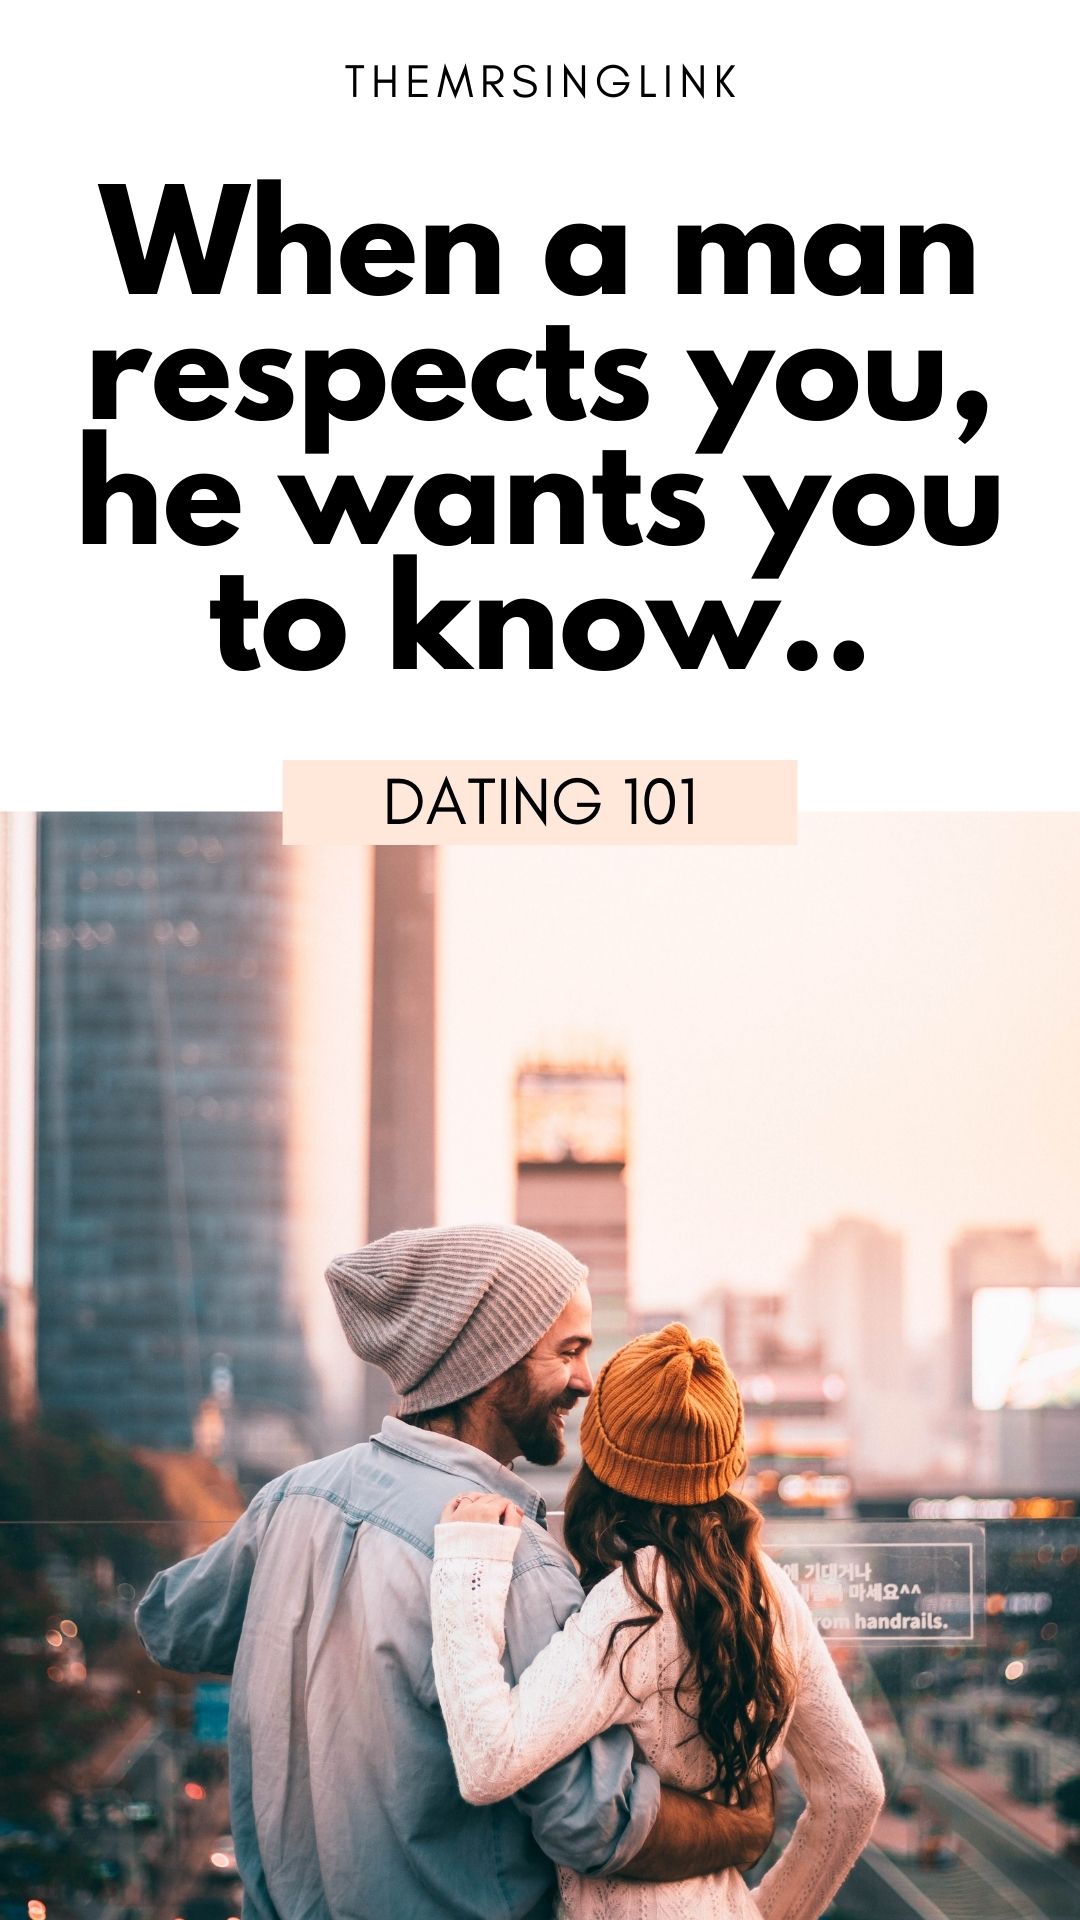 Dating 101 When A Man Respects You He Wants You To Know Themrsinglink